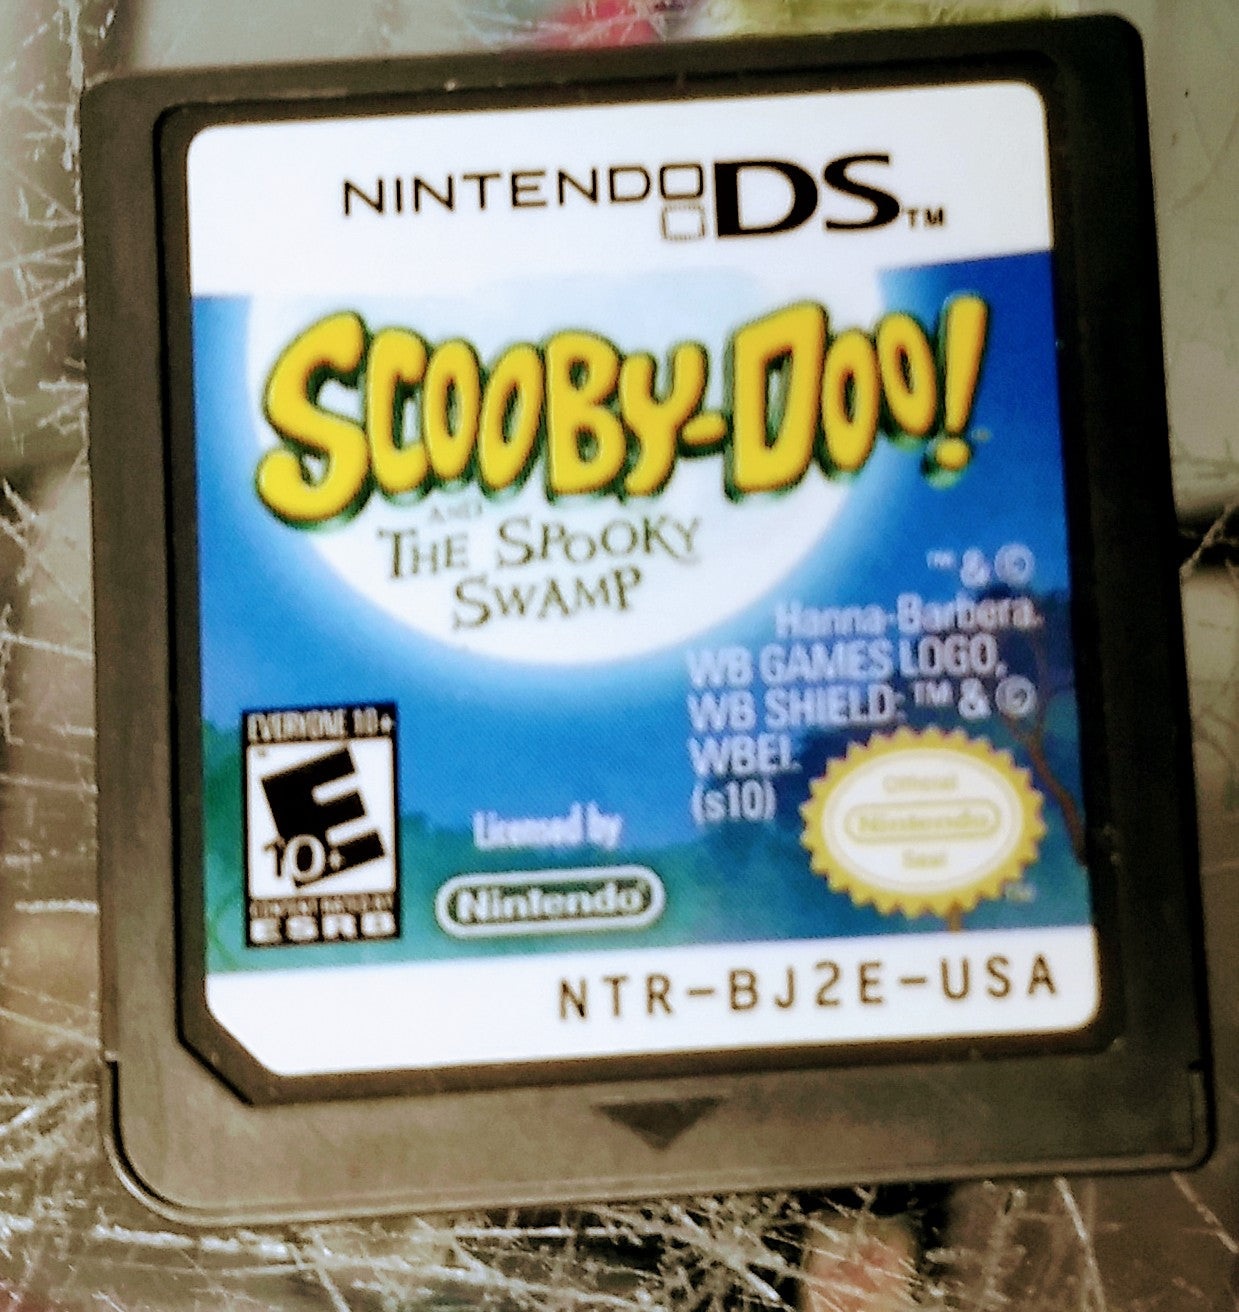 SCOOBY DOO! AND THE SPOOKY SWAMP NINTENDO DS - jeux video game-x